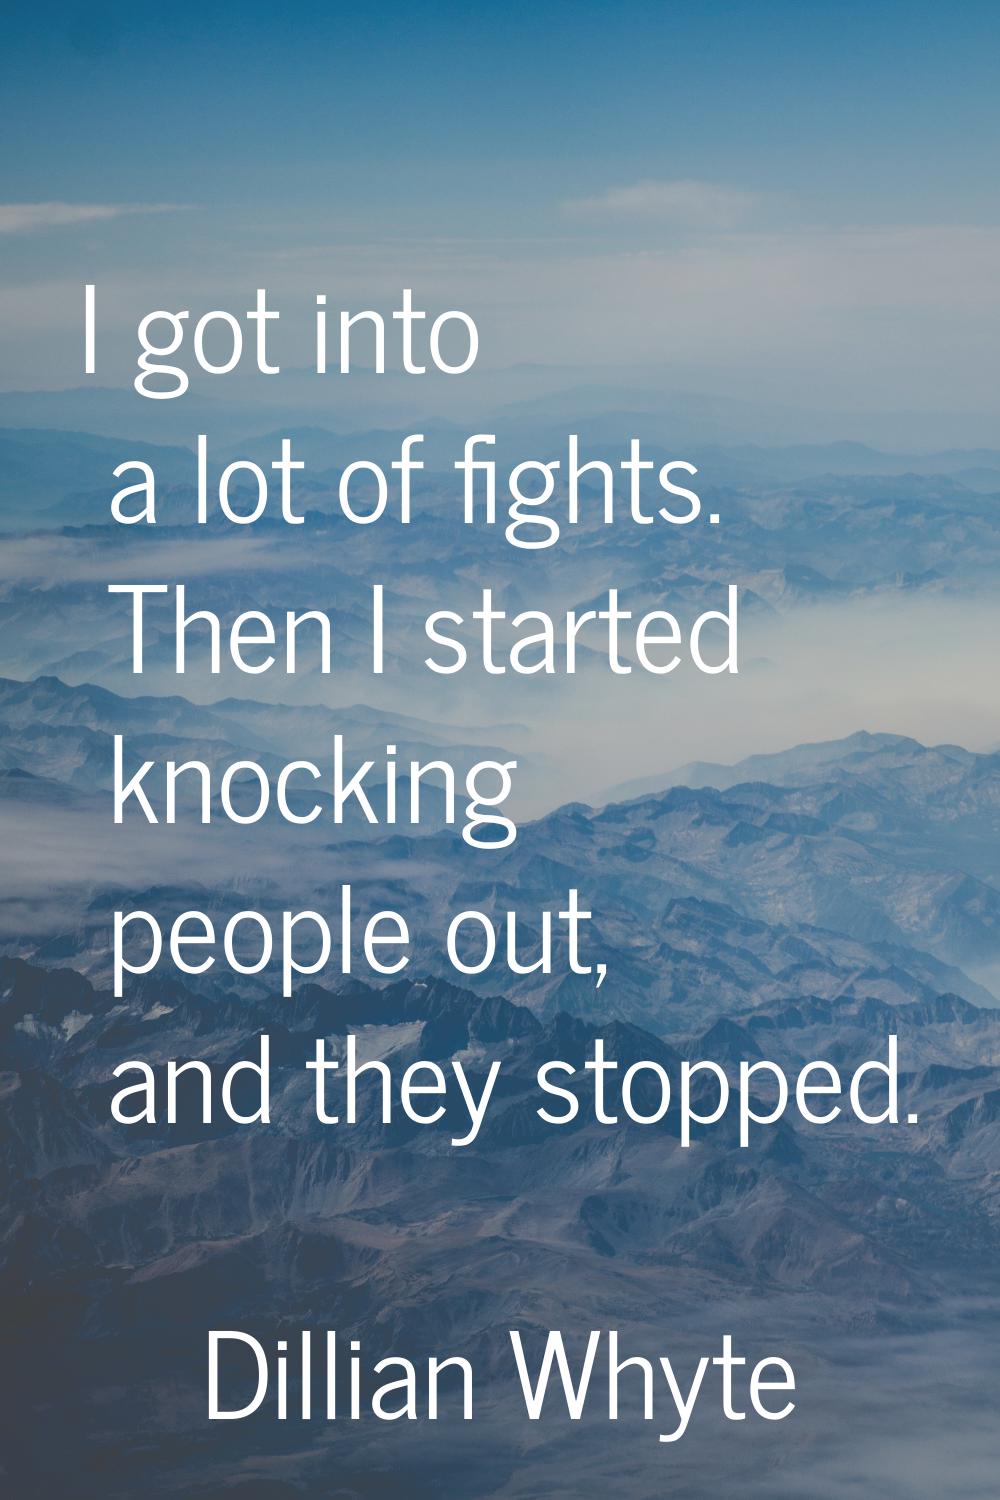 I got into a lot of fights. Then I started knocking people out, and they stopped.